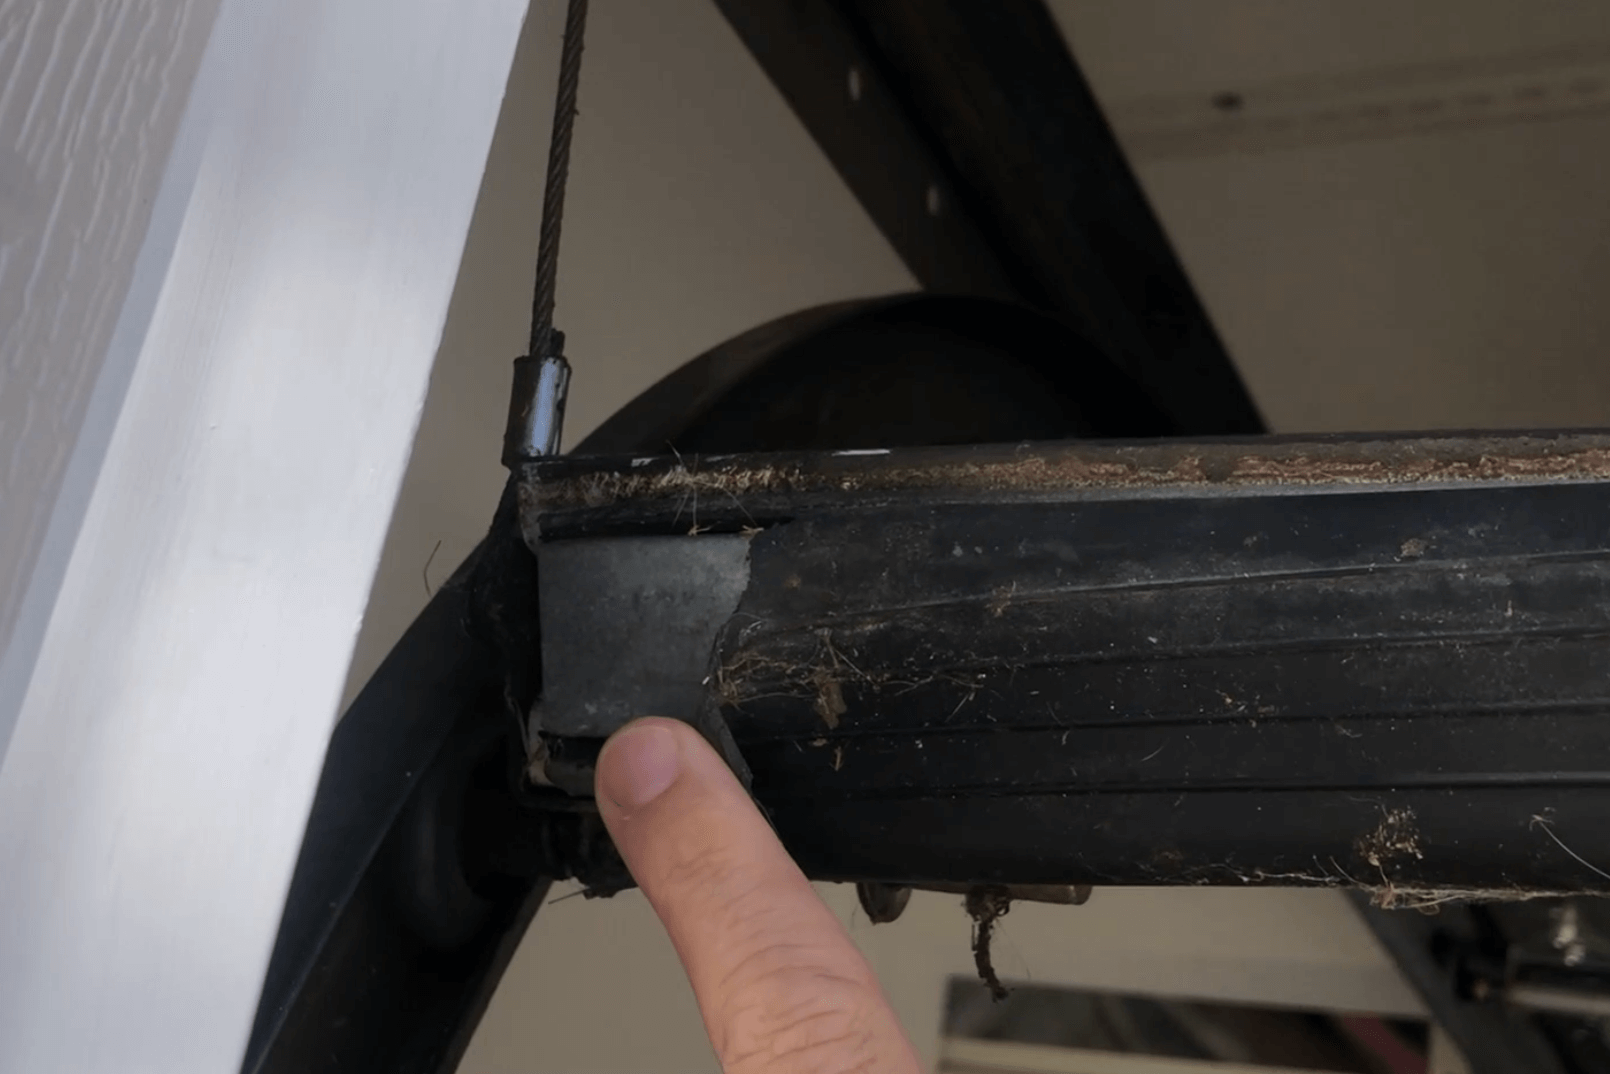 Garage door seals, also known as weatherstripping, help keep insects and debris out of the garage. While also keeping rain and cold air from seeping through the cracks around the garage door.